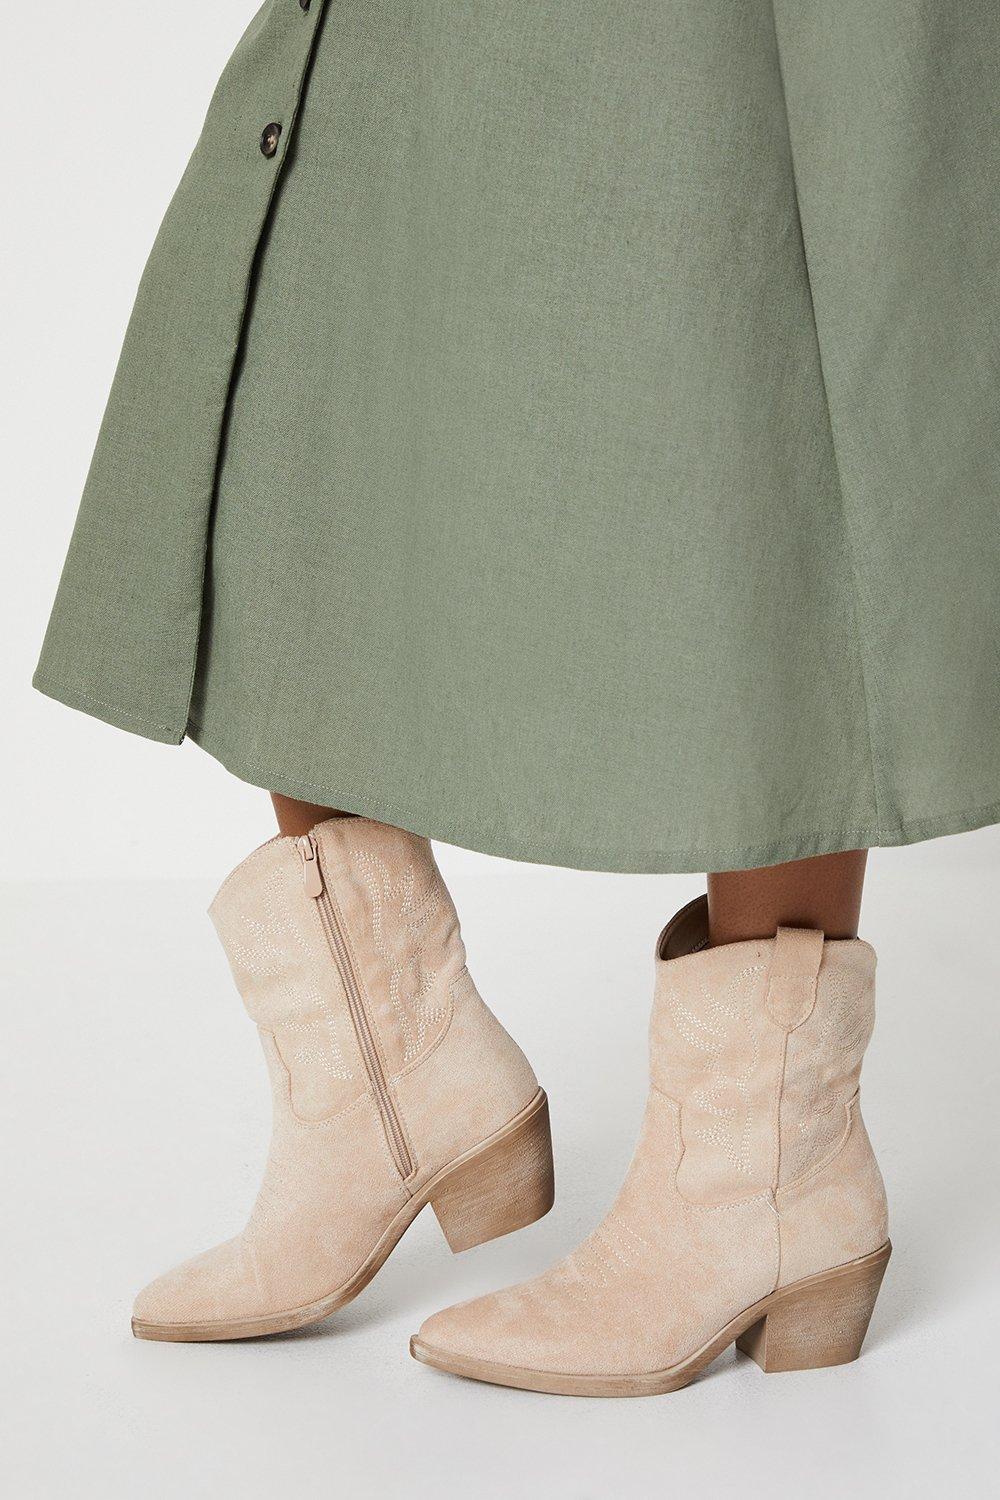 June Embroidered Western Ankle Boots